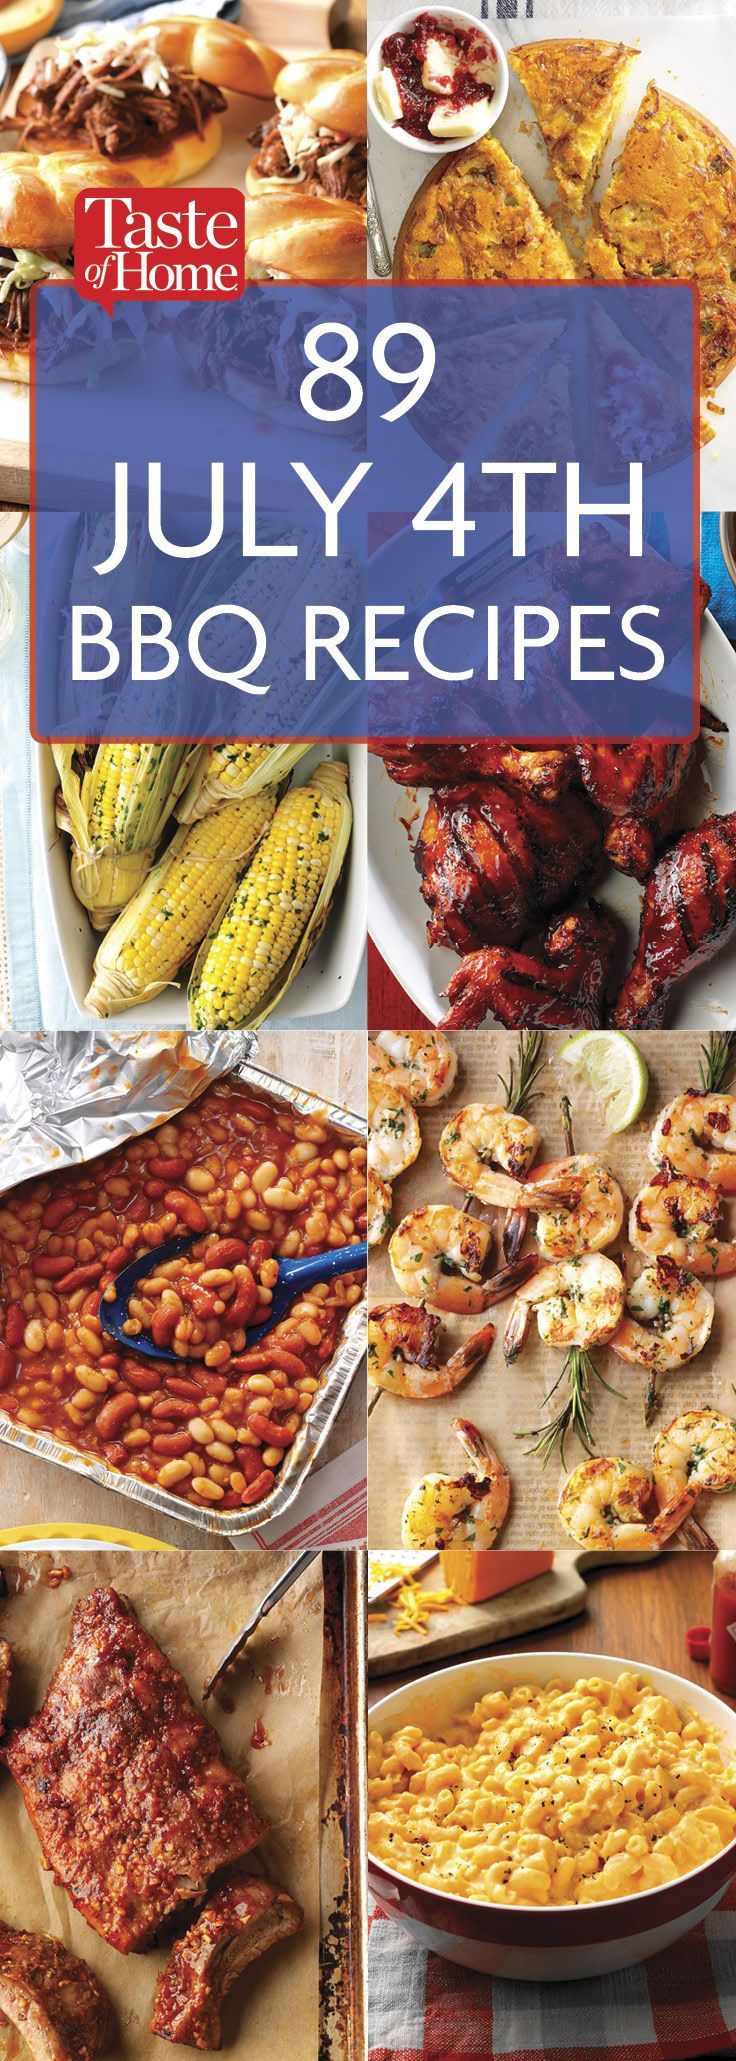 89 Smoky, Saucy and Meaty July 4th BBQ Recipes - 89 Smoky, Saucy and Meaty July 4th BBQ Recipes -   July 4th food Ideas